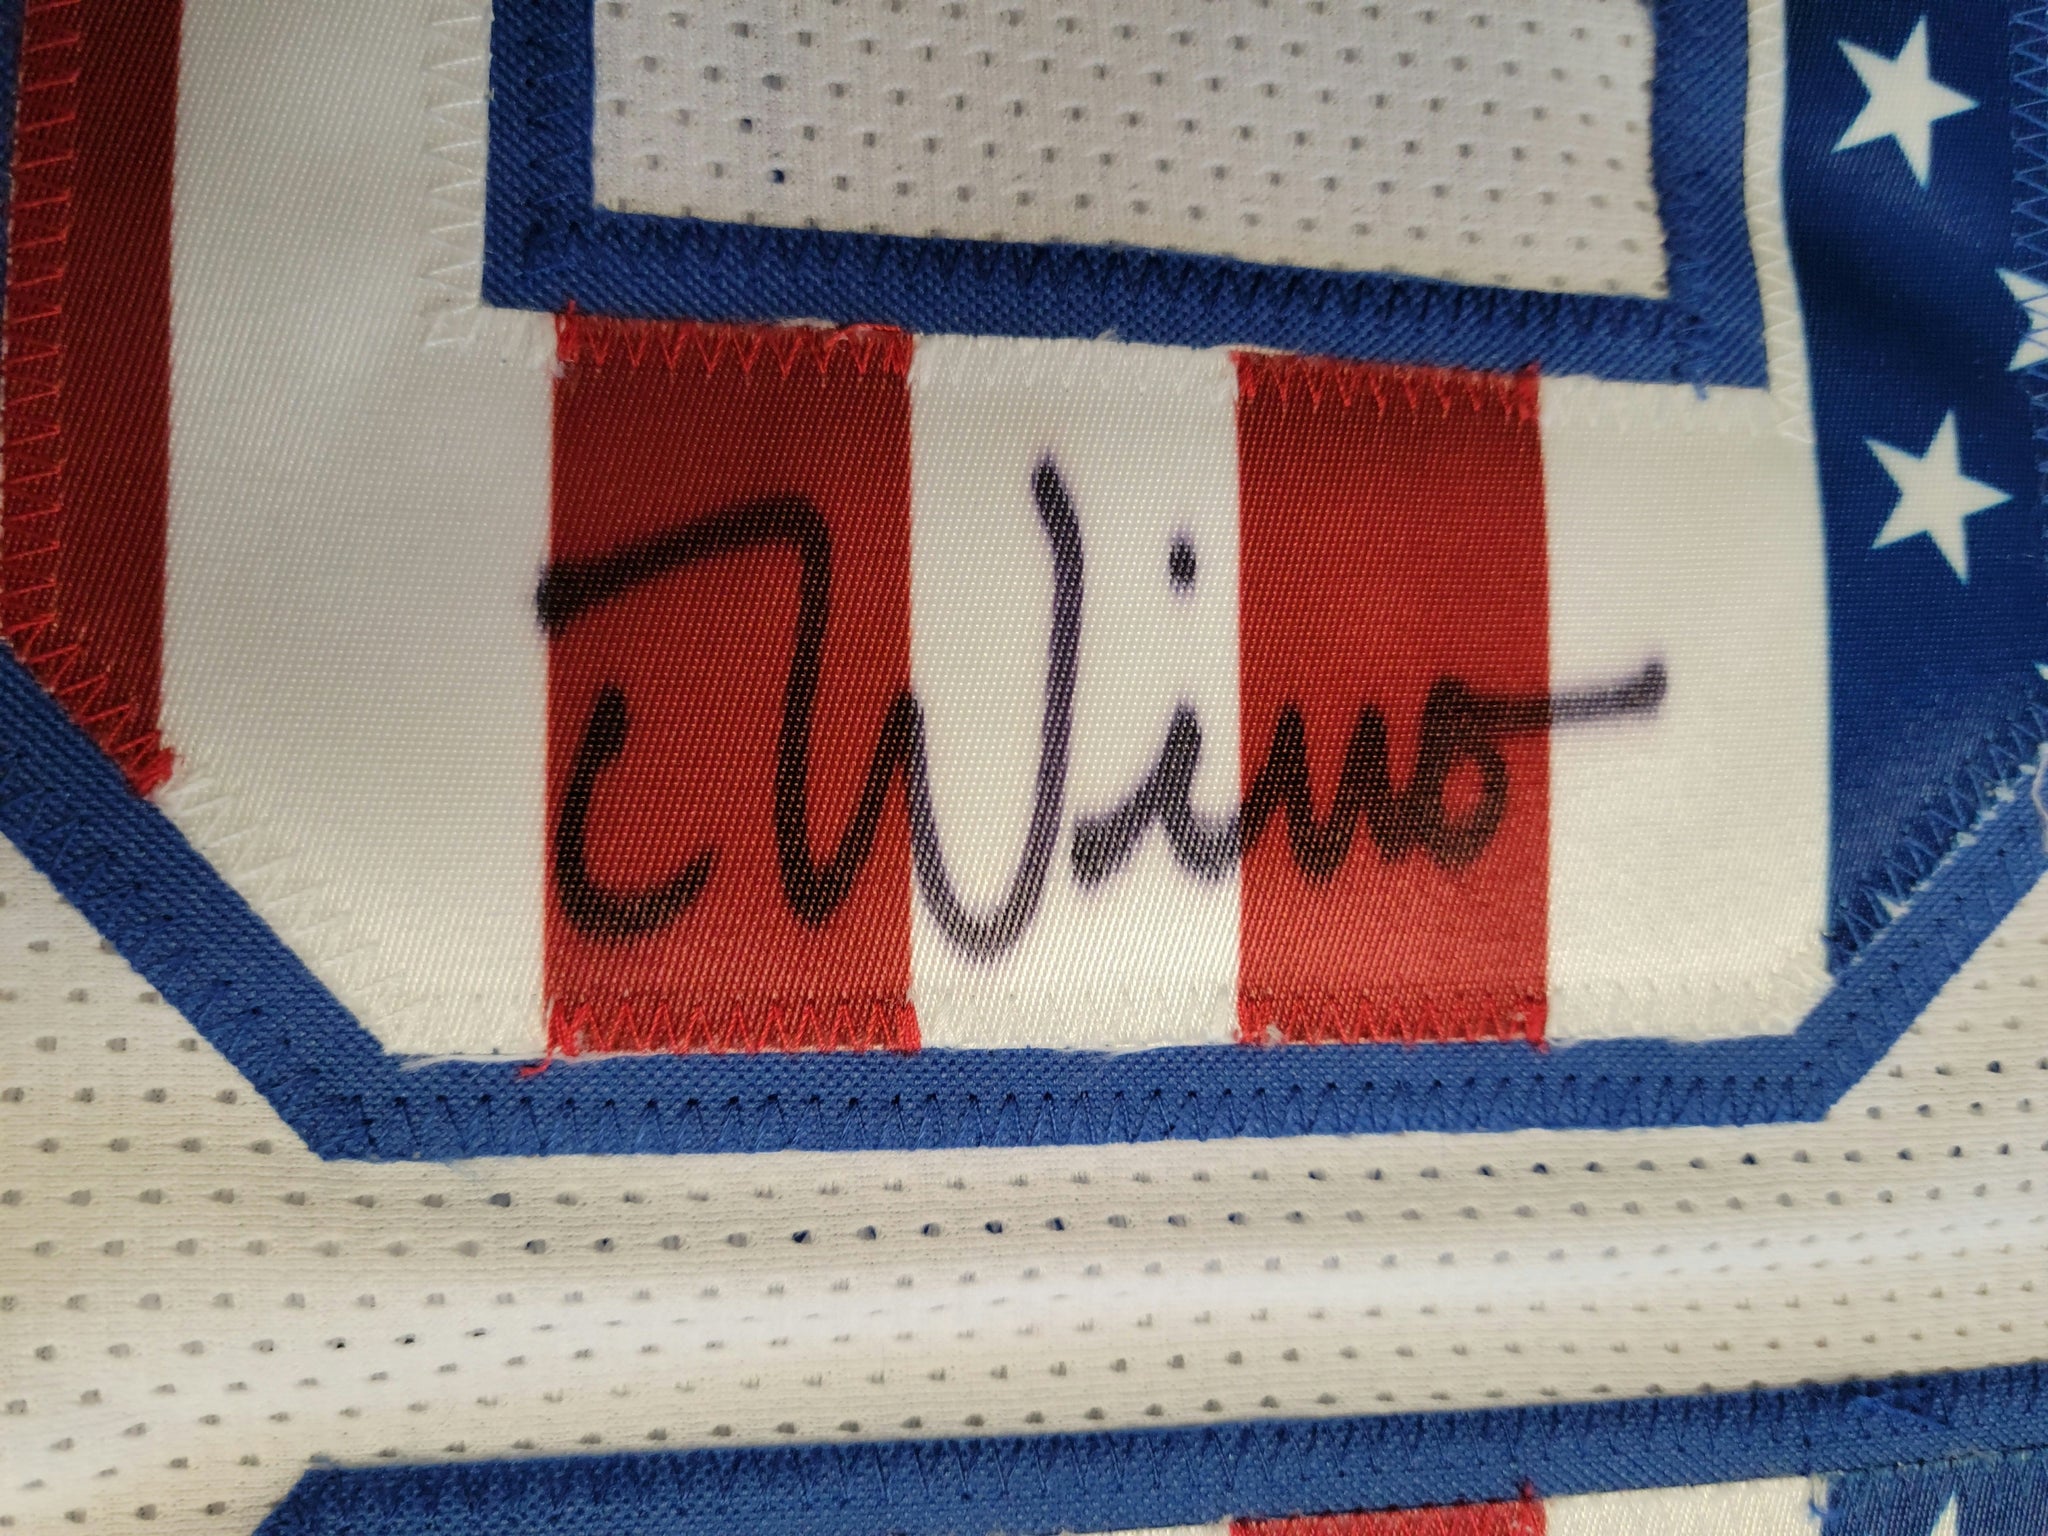 Chase Winovich Authentic Signed Pro Style Jersey Autographed Beckett